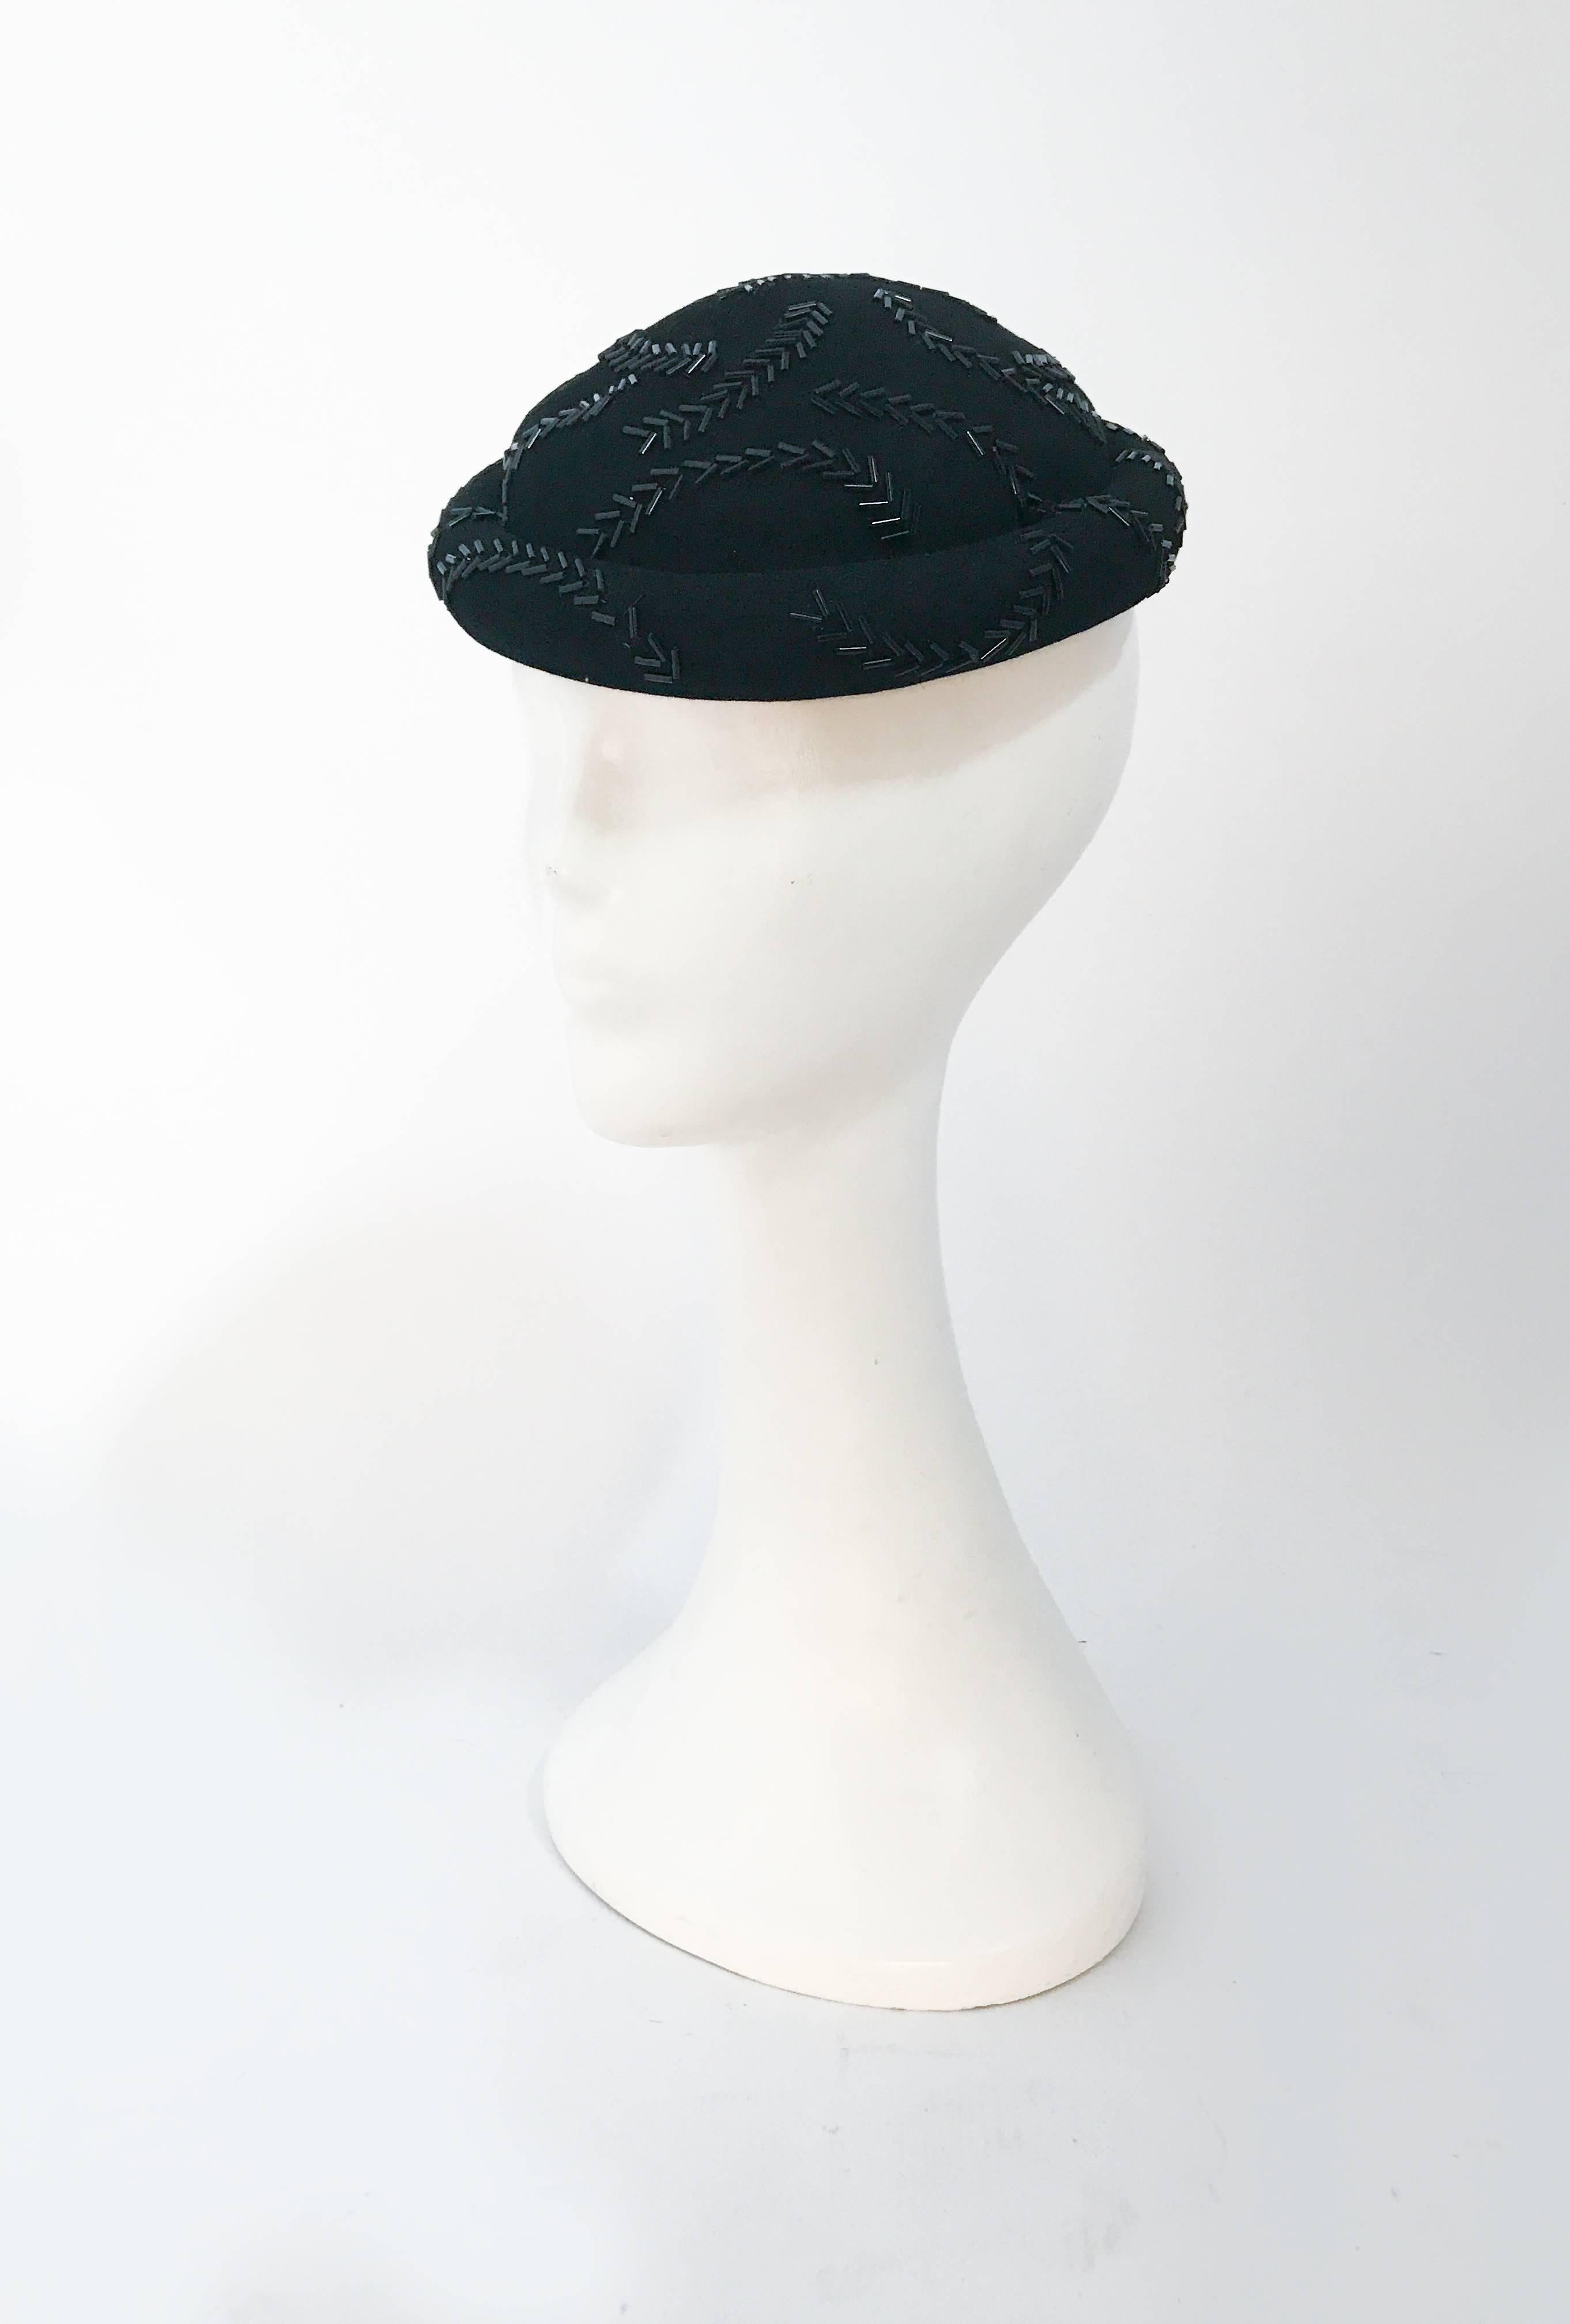 1930s Black Felt Beaded Cocktail Hat. Black felt cocktail hat with glass hand beaded embellishments and rolled brim. Elastic is used to secure the hat to the head.